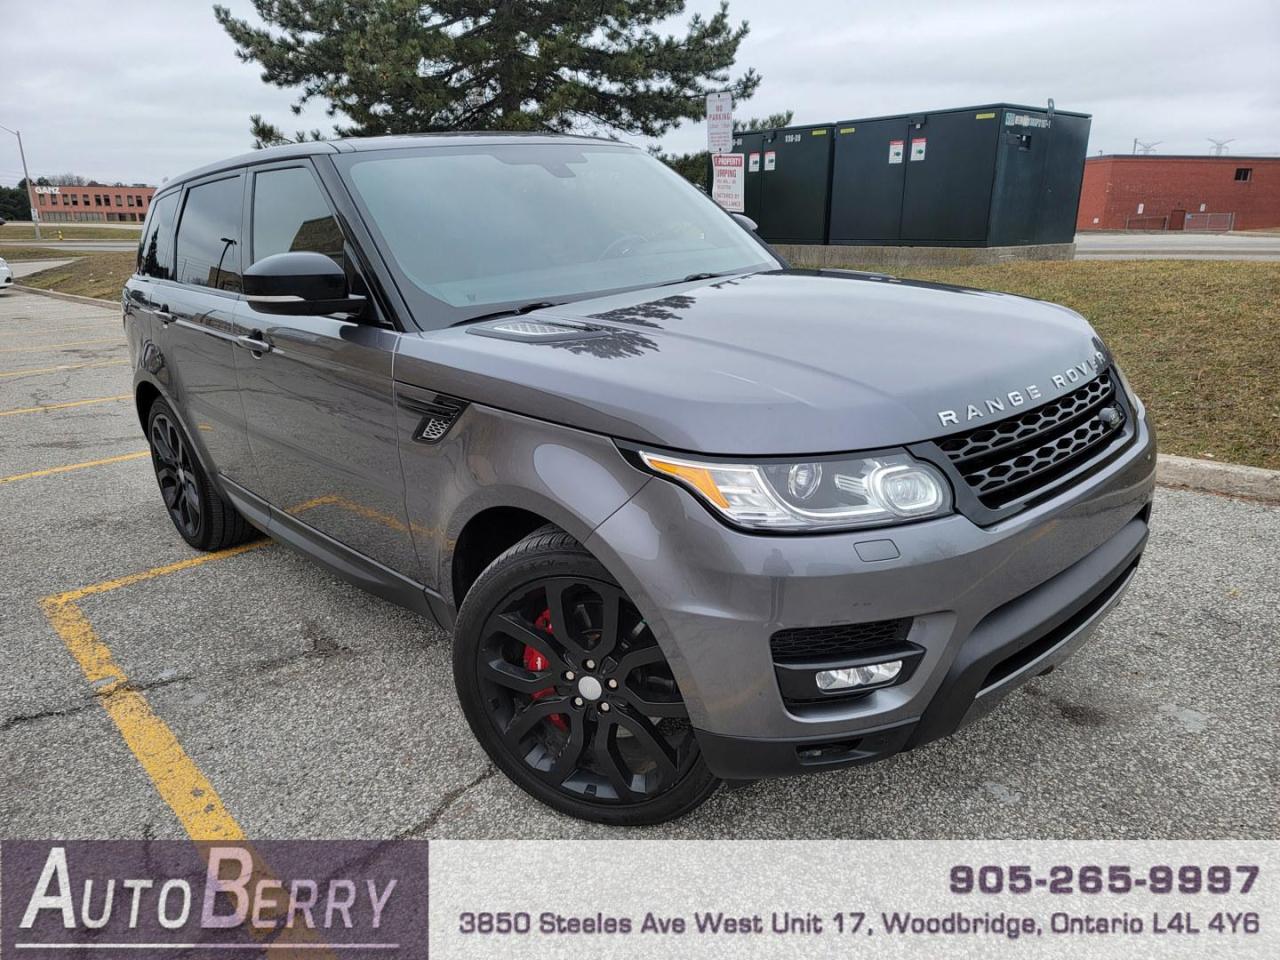 2016 Land Rover Range Rover Sport 5.0L V8 Supercharged - Photo #1